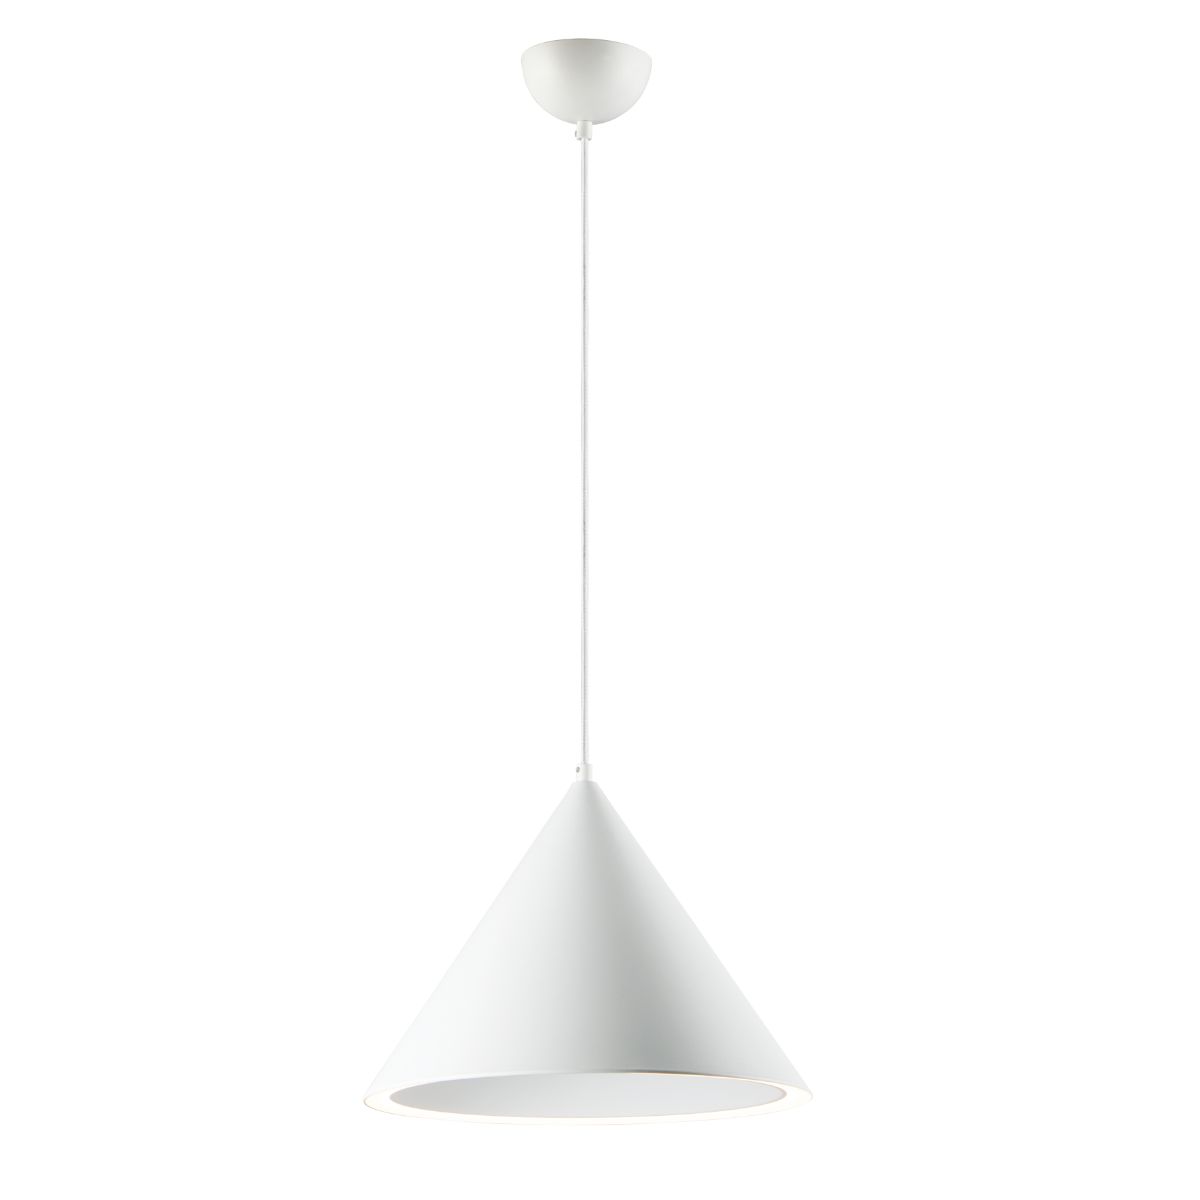 Abyss 16 in. LED Pendant Light